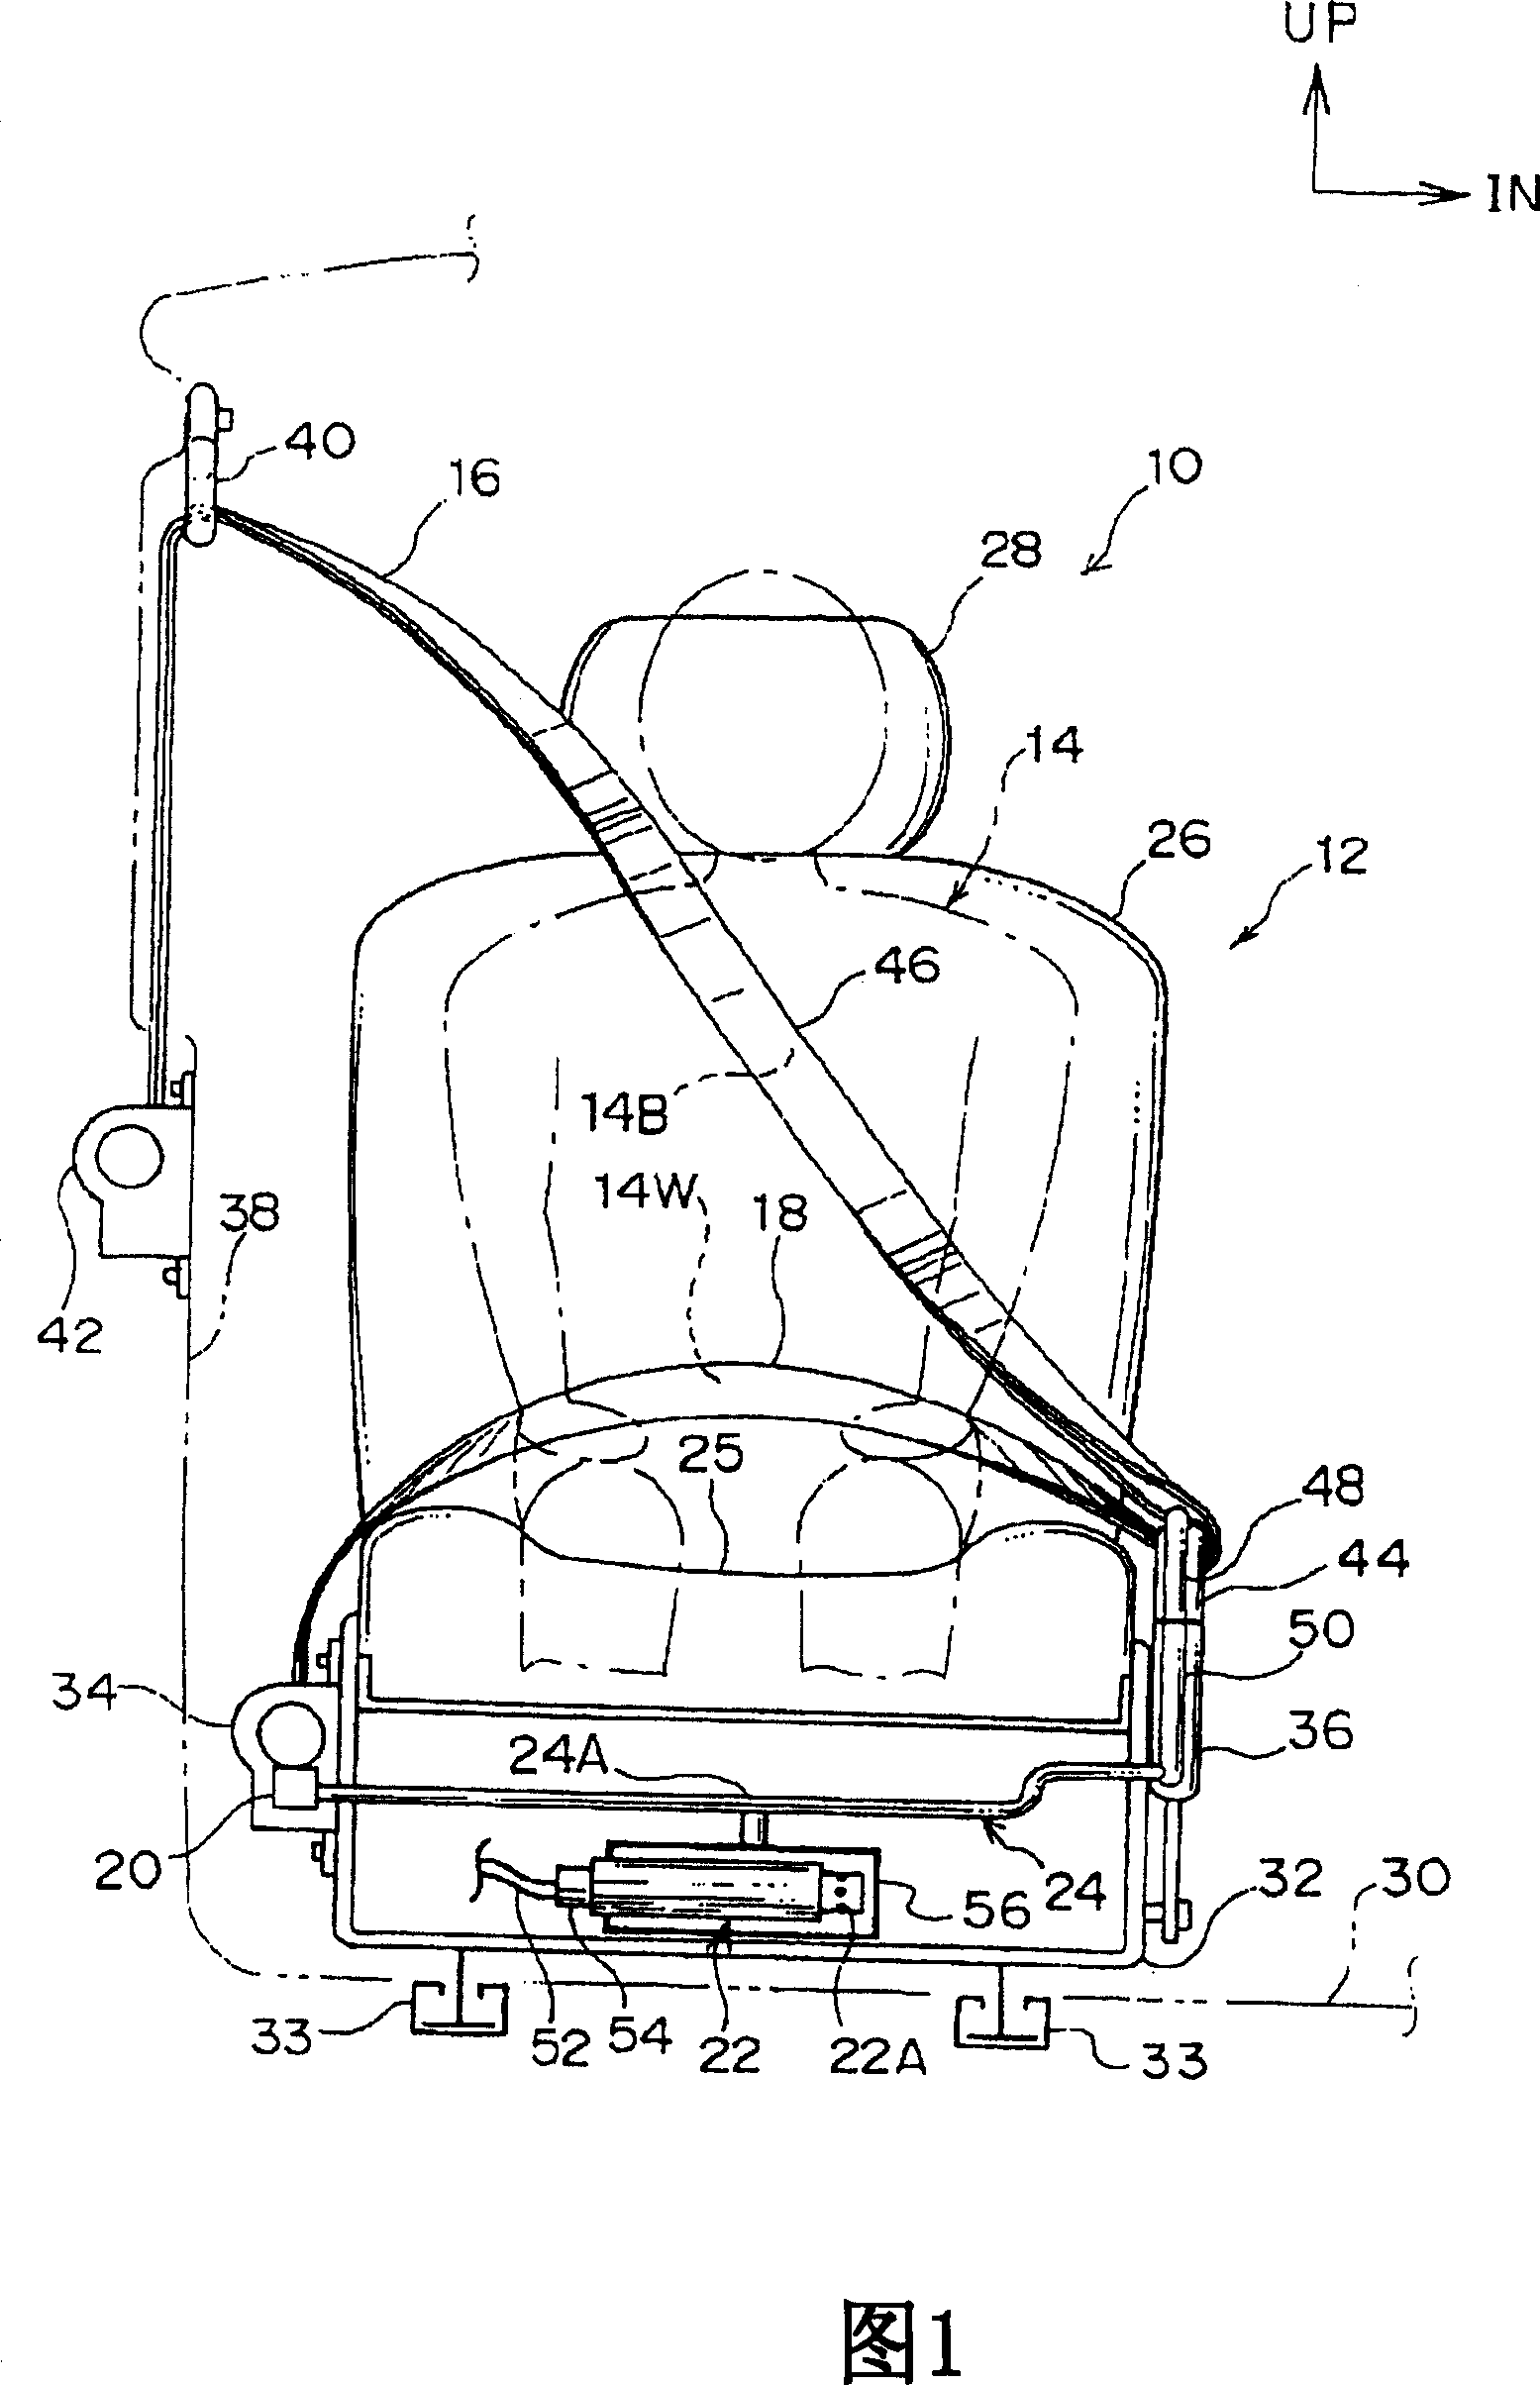 Air belt apparatus for use in a motor vehicle